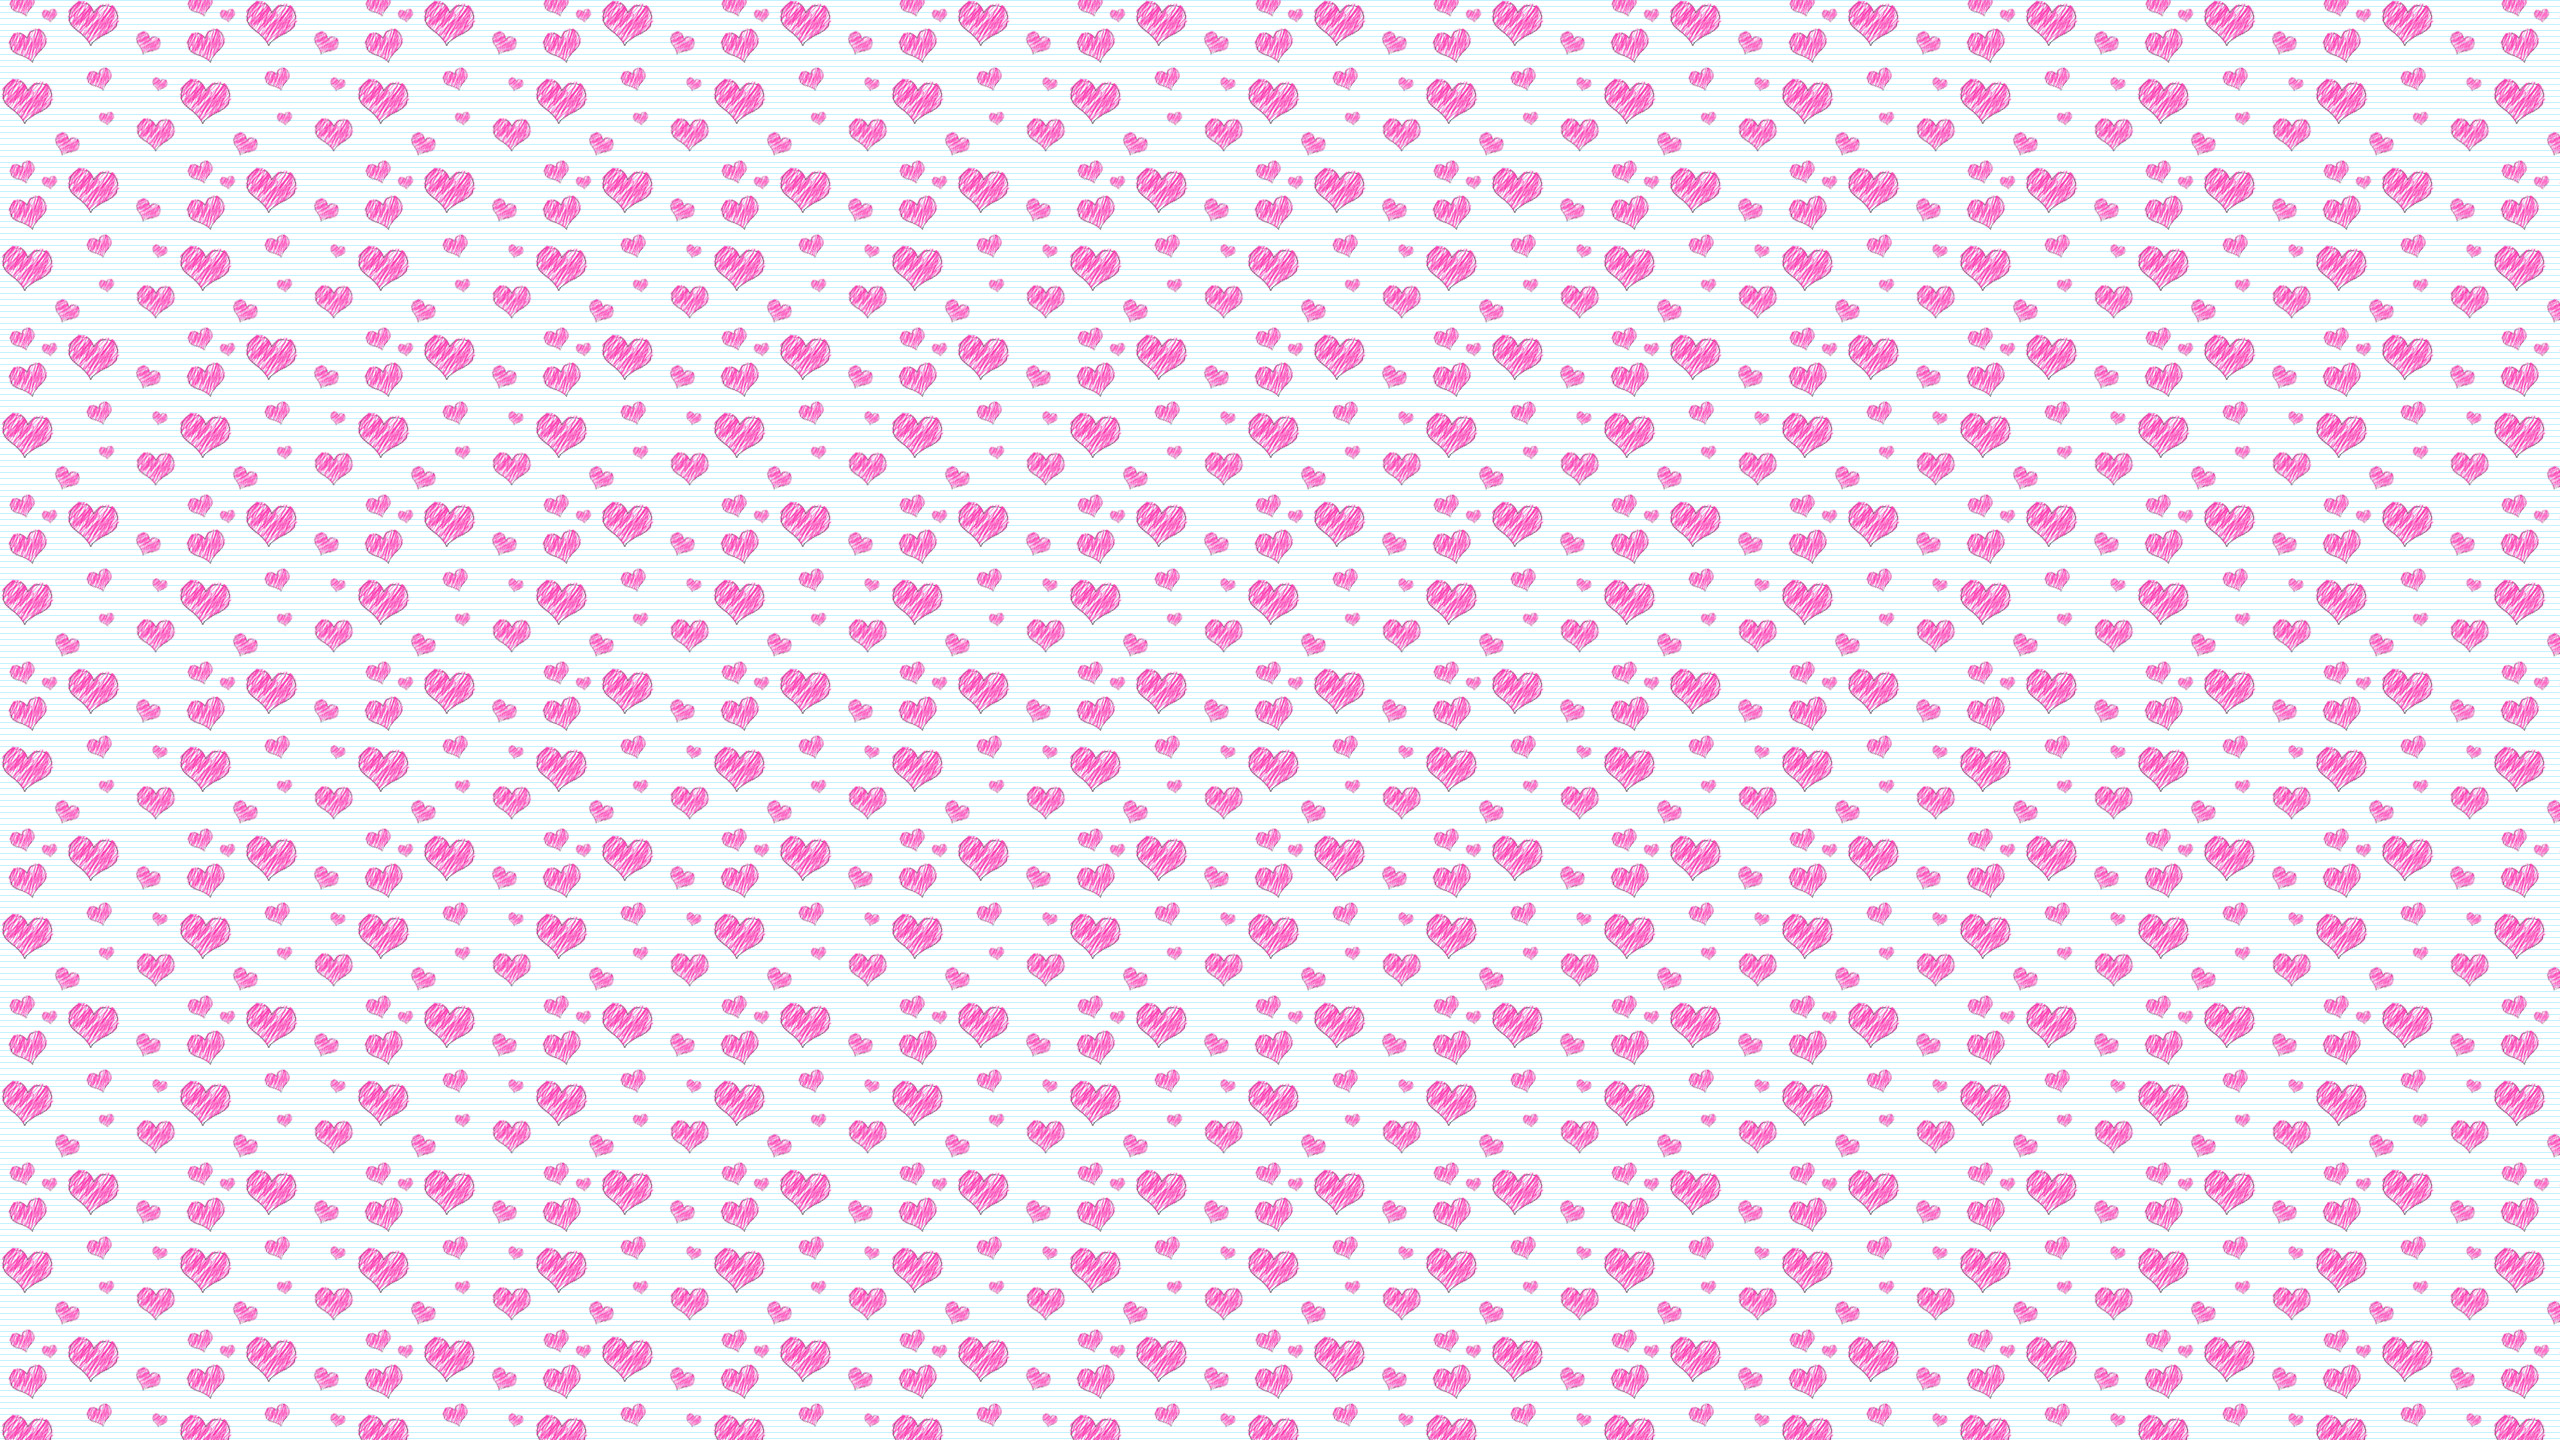 2560x1440 Pink Heart Background Wallpaper, HDQ Beautiful Pink Heart Images .